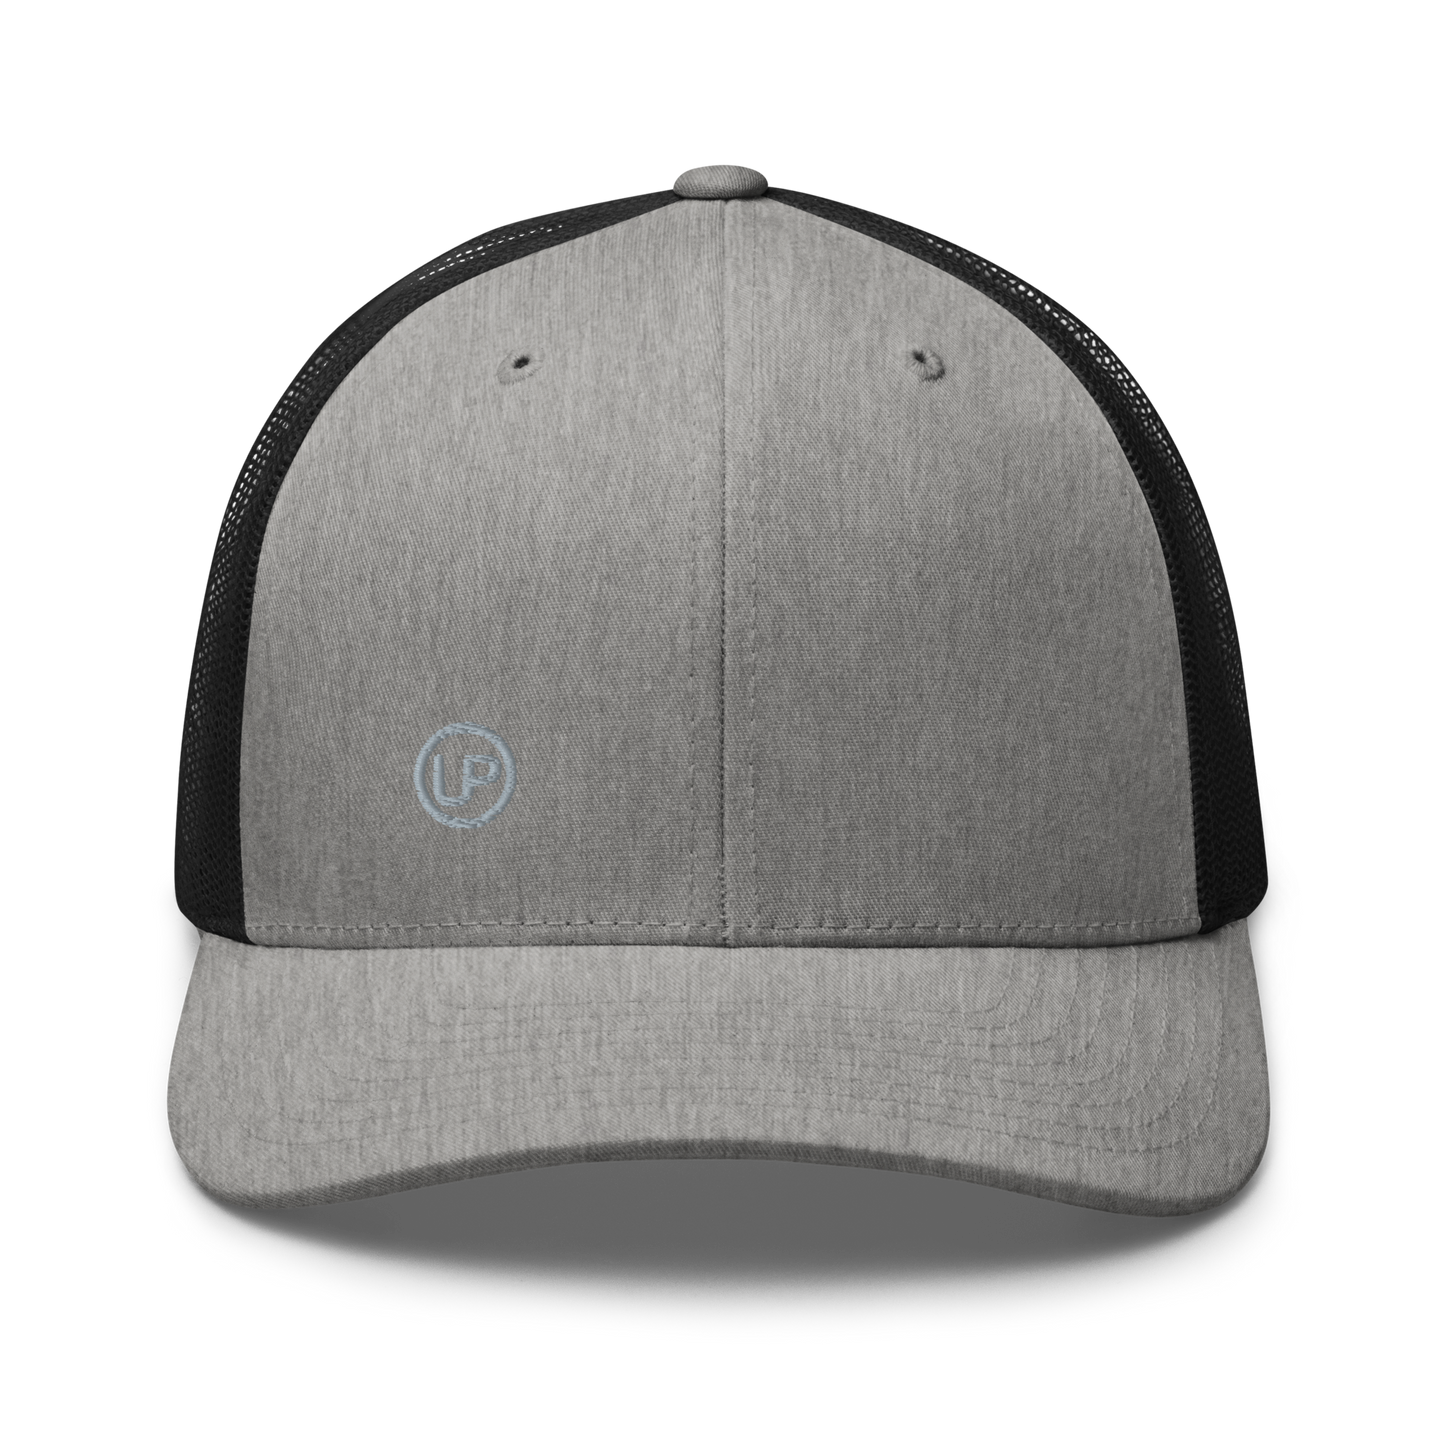 Up Brands Trucker Cap With Small Side Logo (White Color)